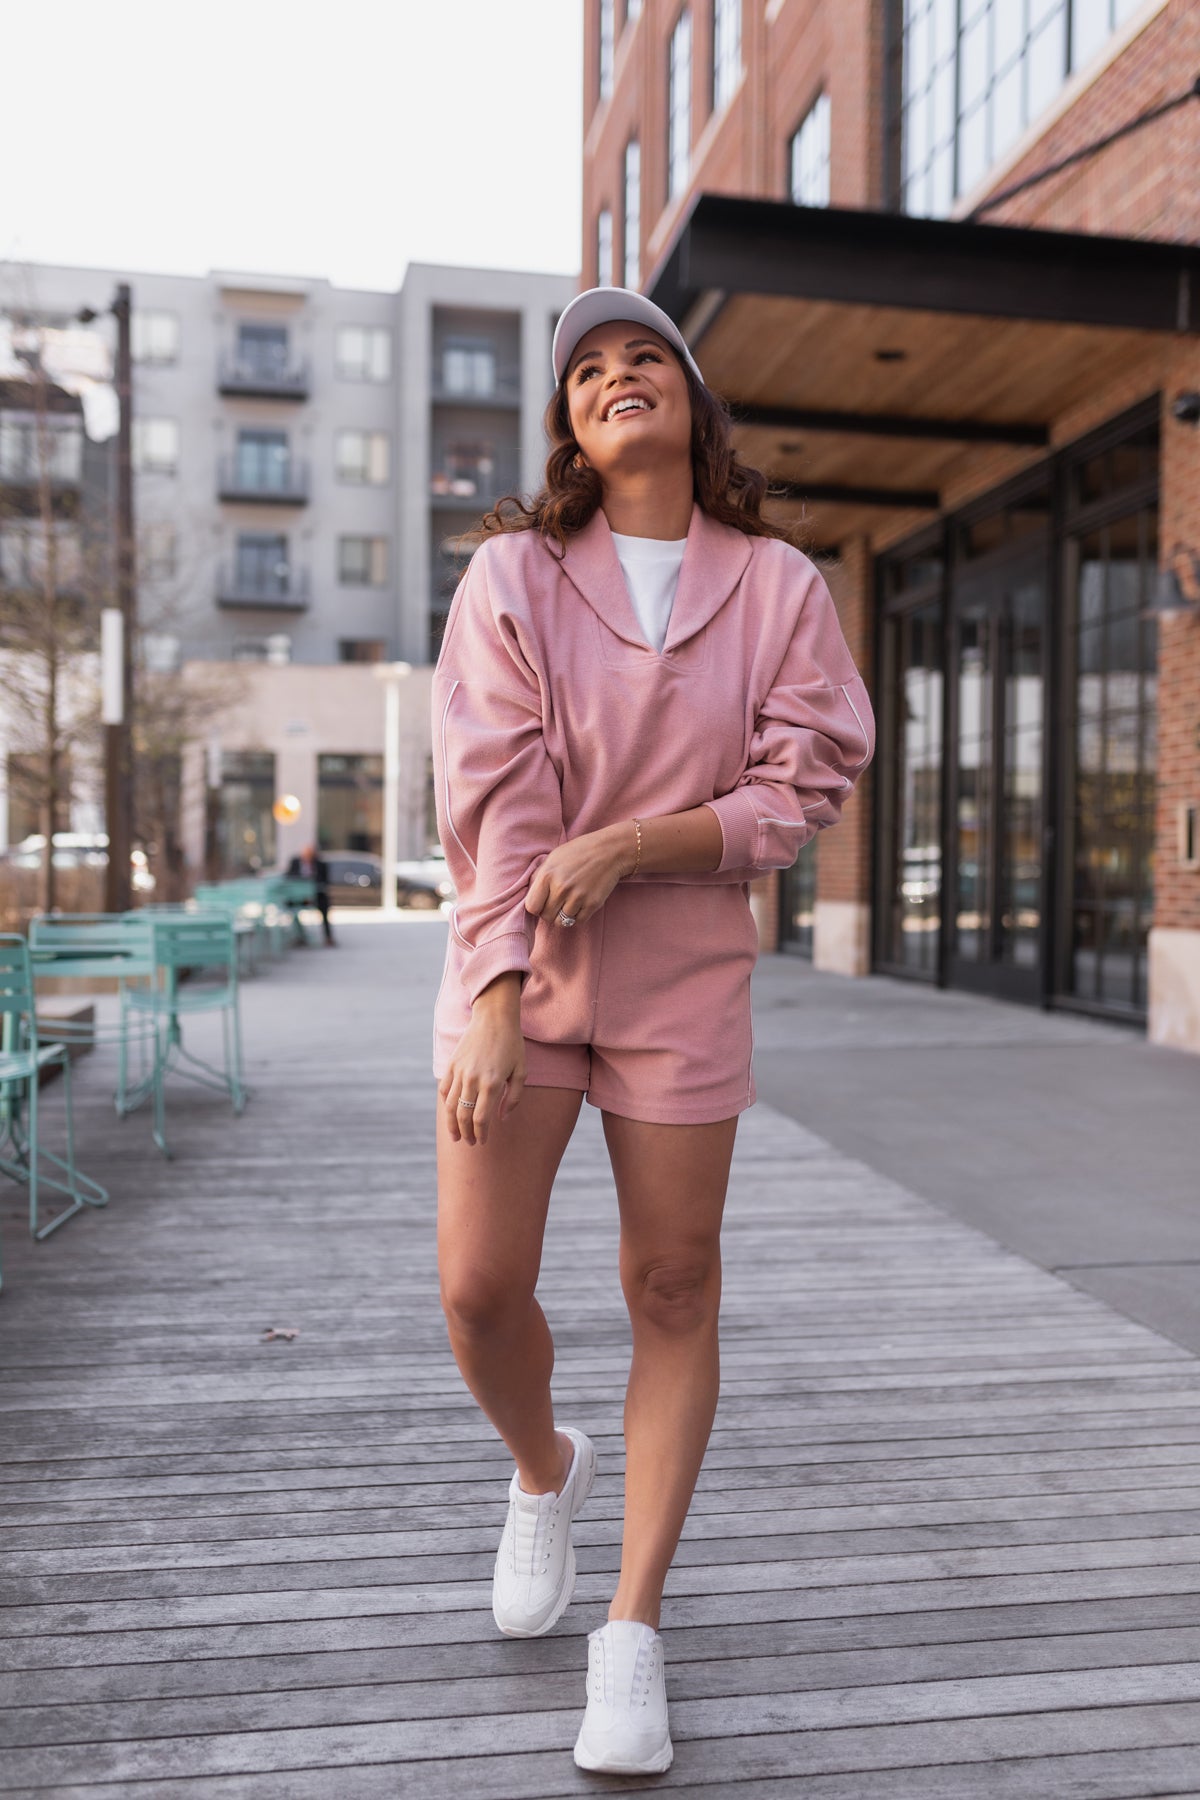 ELLE PINK TERRY PULLOVER